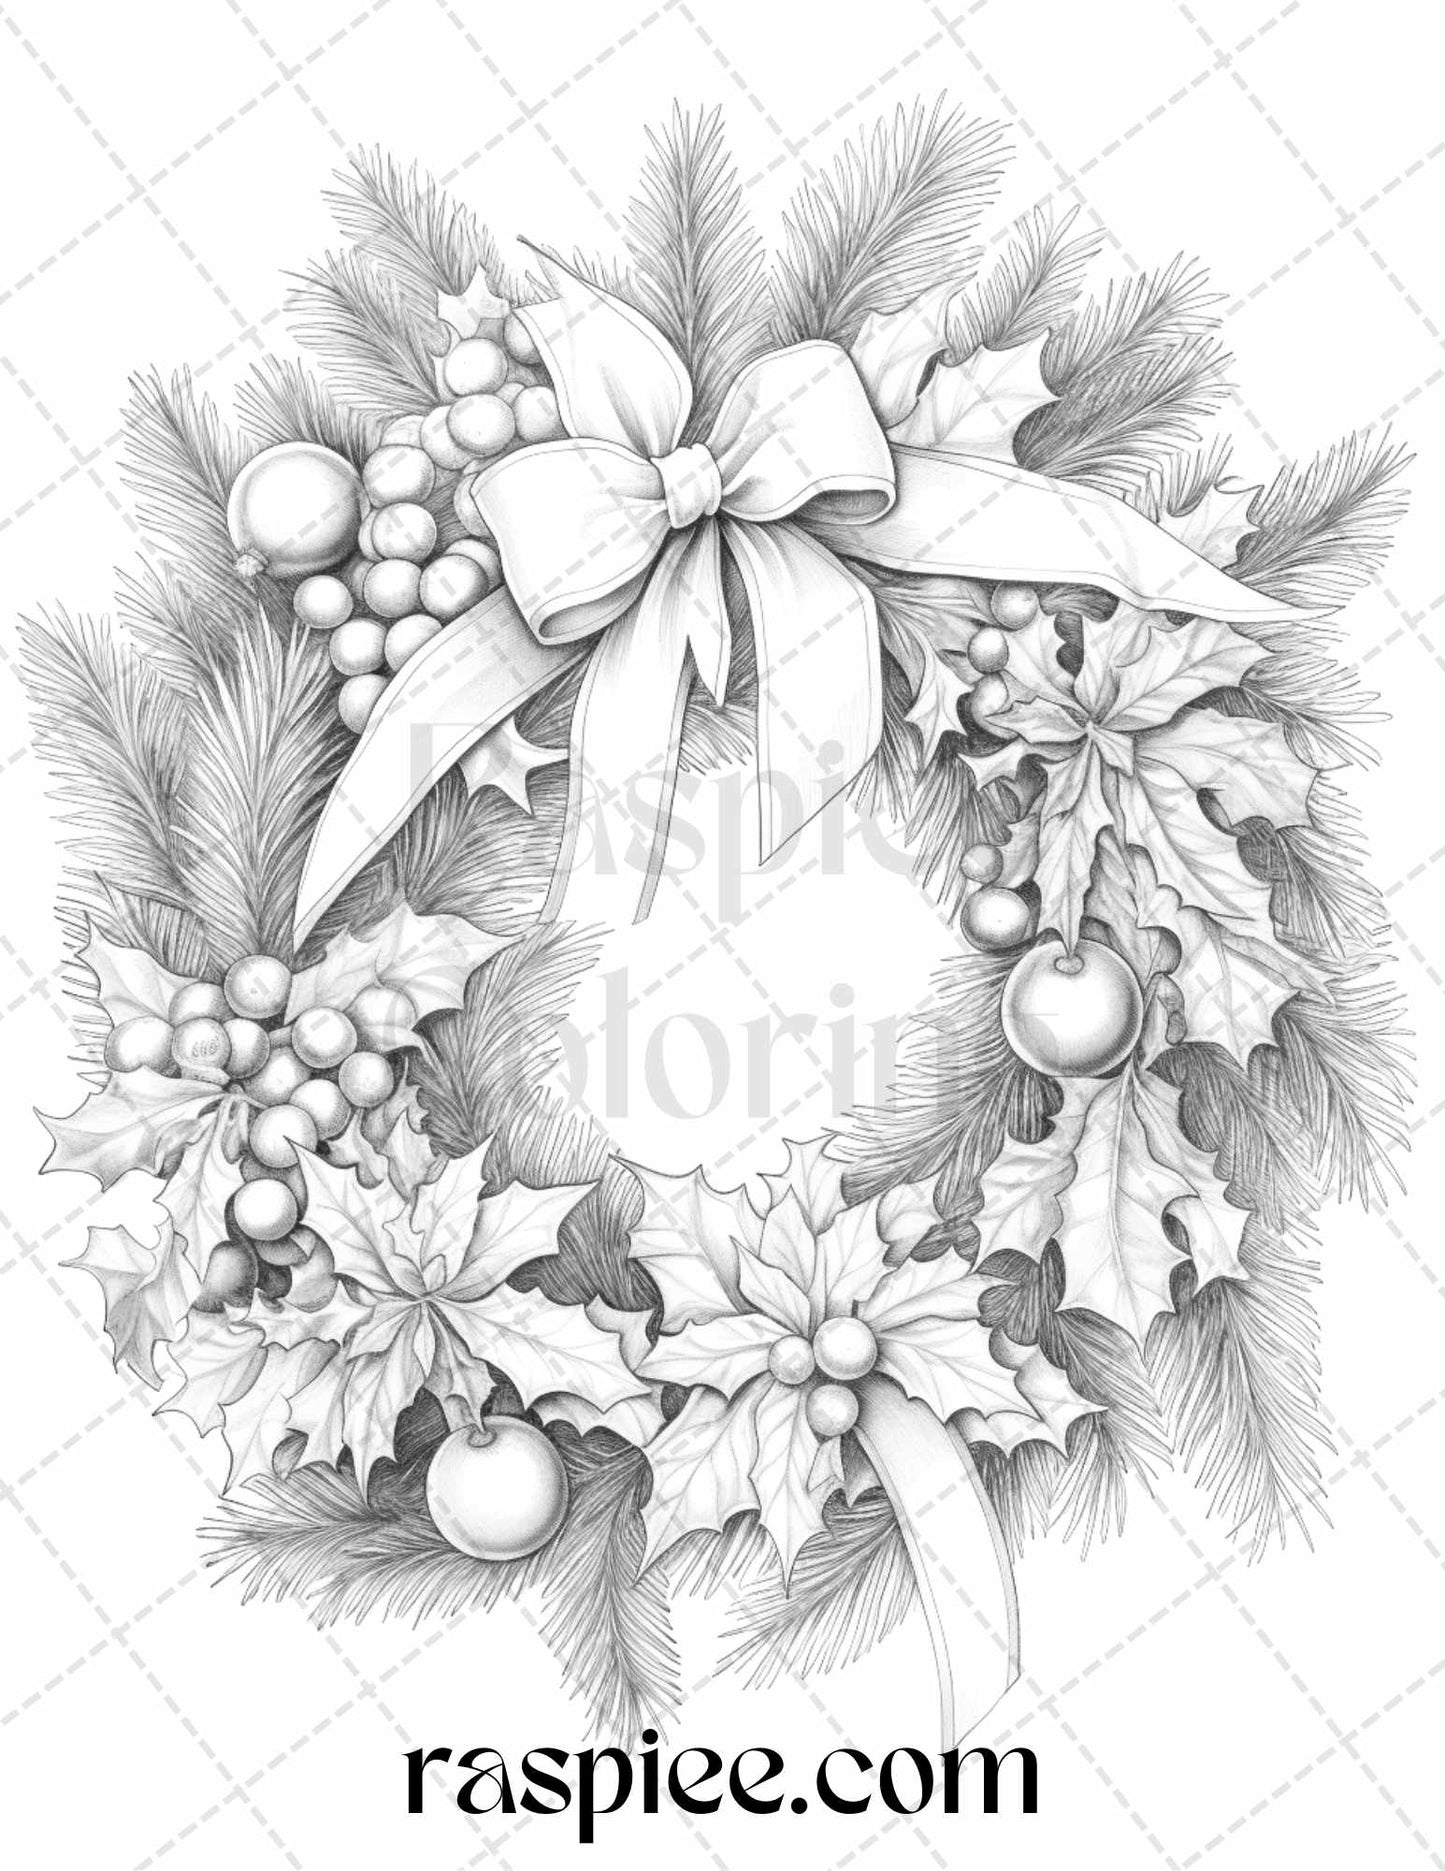 Christmas Wreath Coloring Page, Grayscale Adult Coloring Printable, Holiday DIY Art, Festive Xmas Decorations, Printable Winter Activities, Stress-Relief Coloring Sheet, Intricate Holiday Designs, Digital Downloadable Prints, Creative Relaxation Coloring, Christmas Coloring Ideas